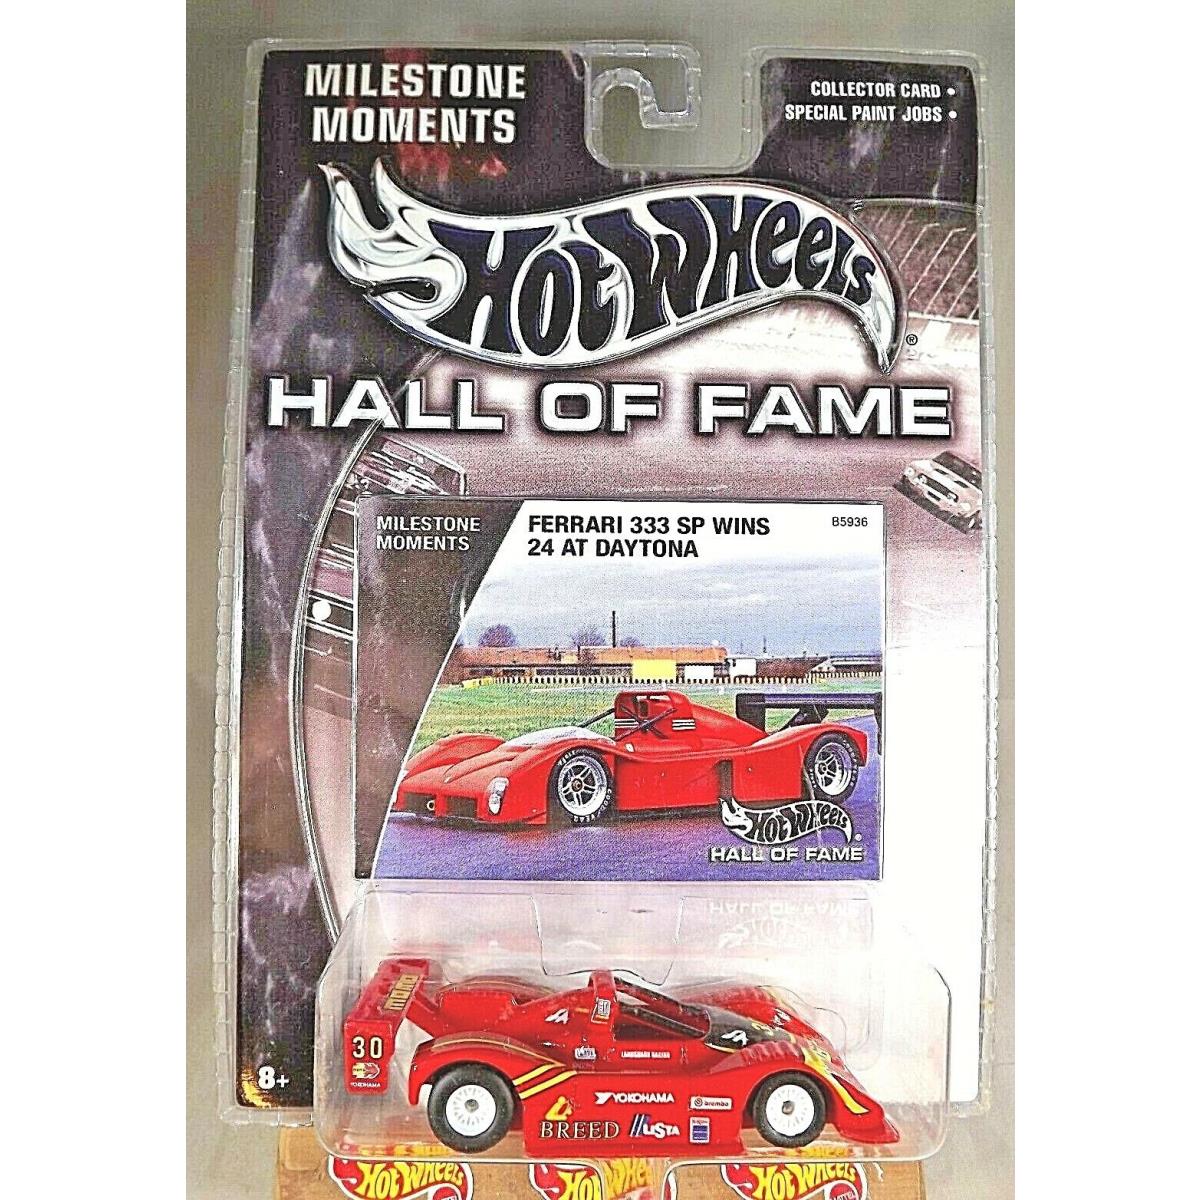 2002 Hot Wheels Hall of Fame Milestone Moments Ferrari 333 SP Red W/real Riders